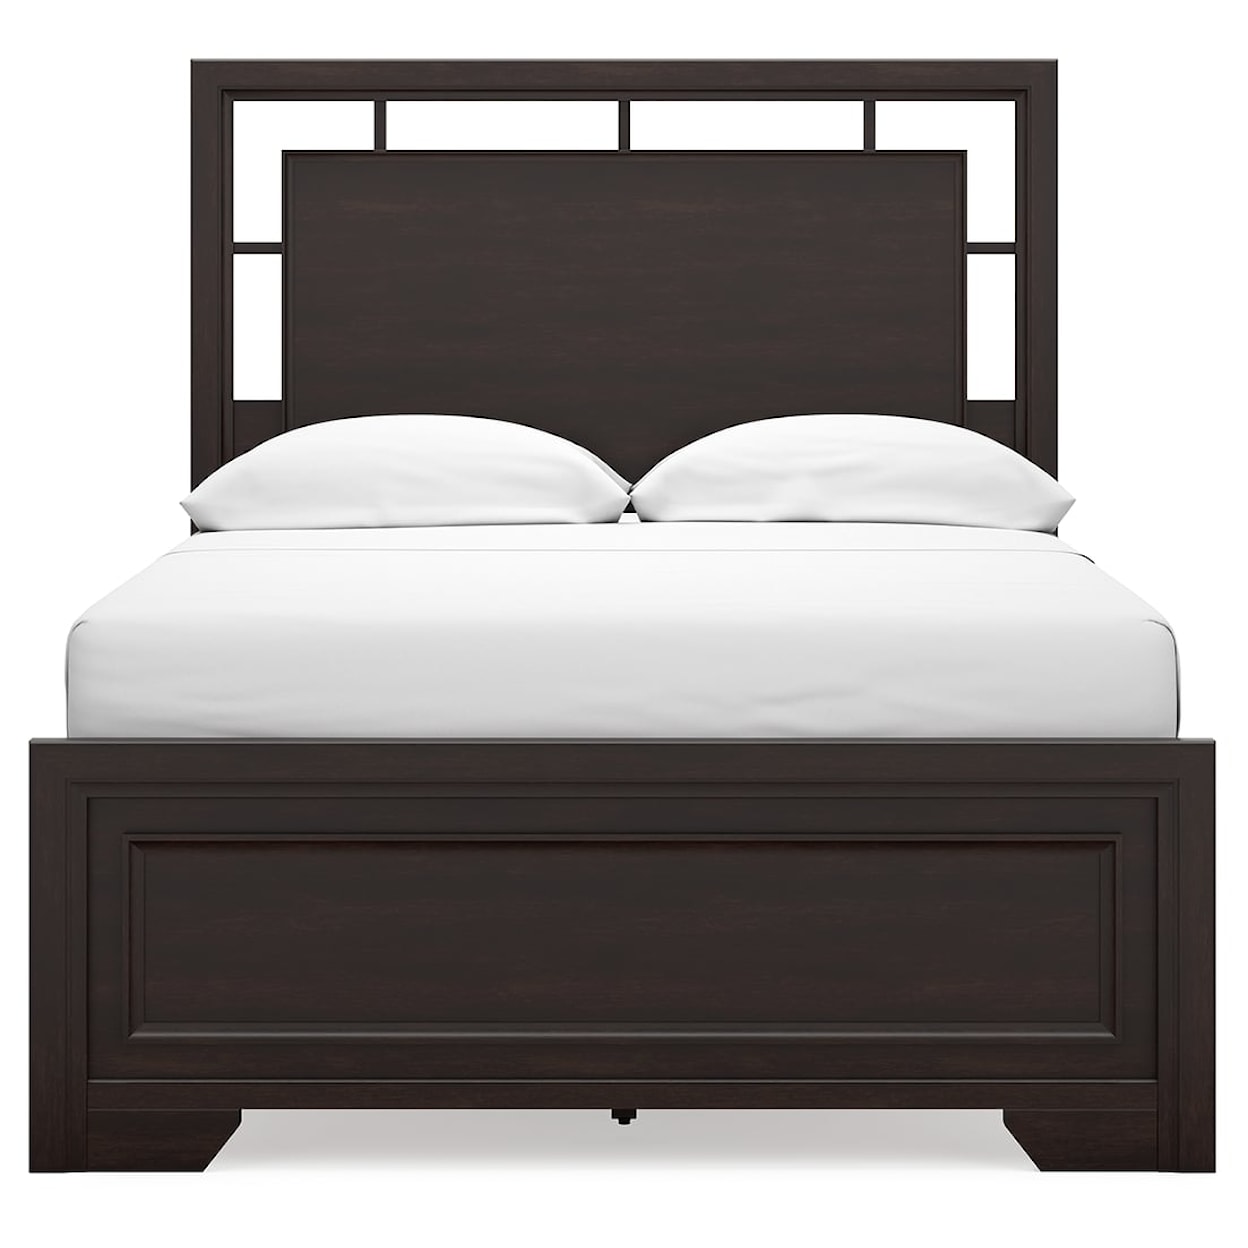 Benchcraft Covetown Full Panel Bed